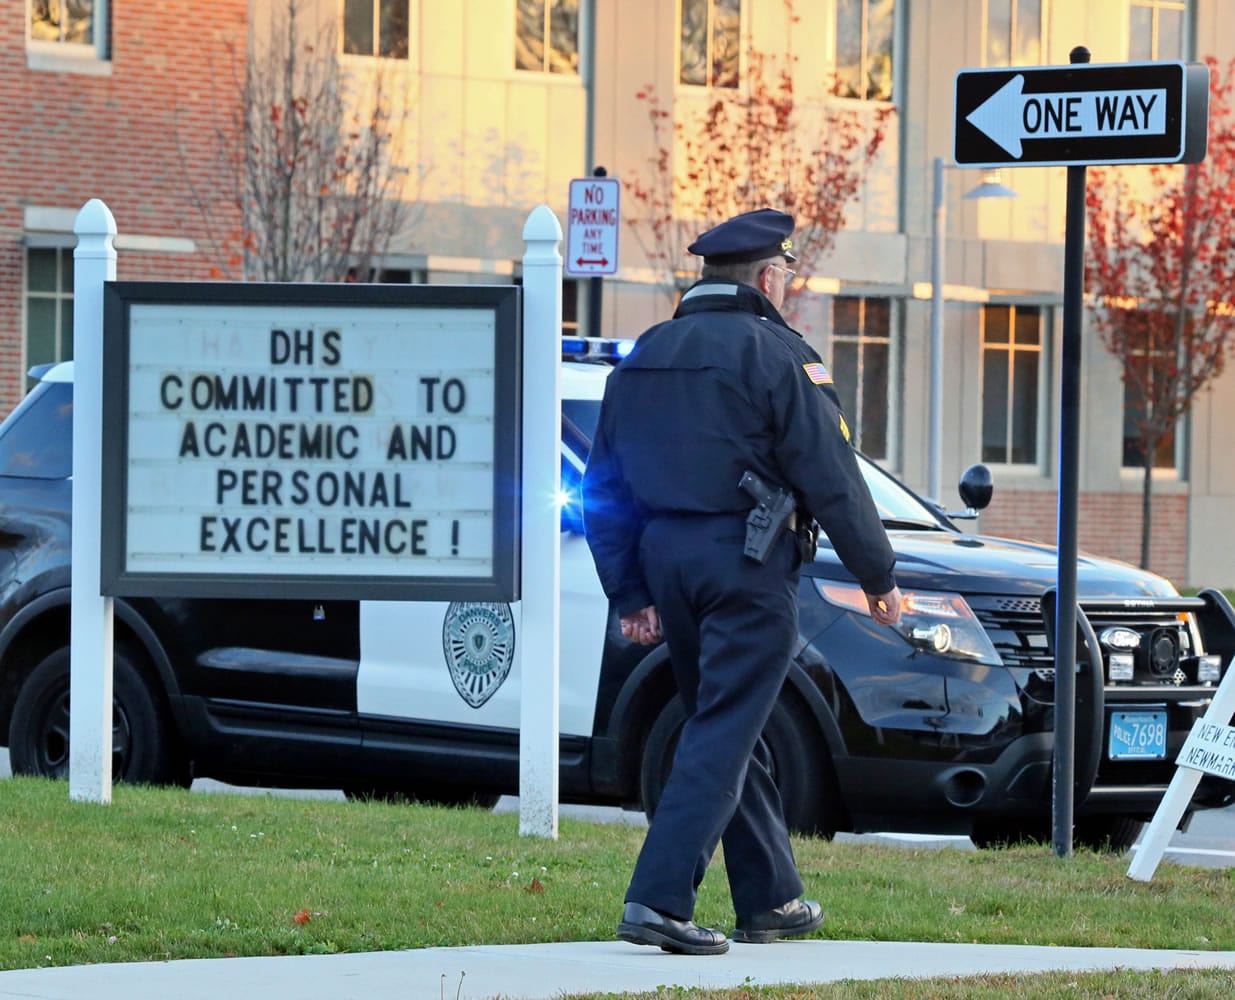 Danvers police are seen Wednesday at the Danvers High School, investigating a report of a sudden death inside the school in Danvers, Mass.